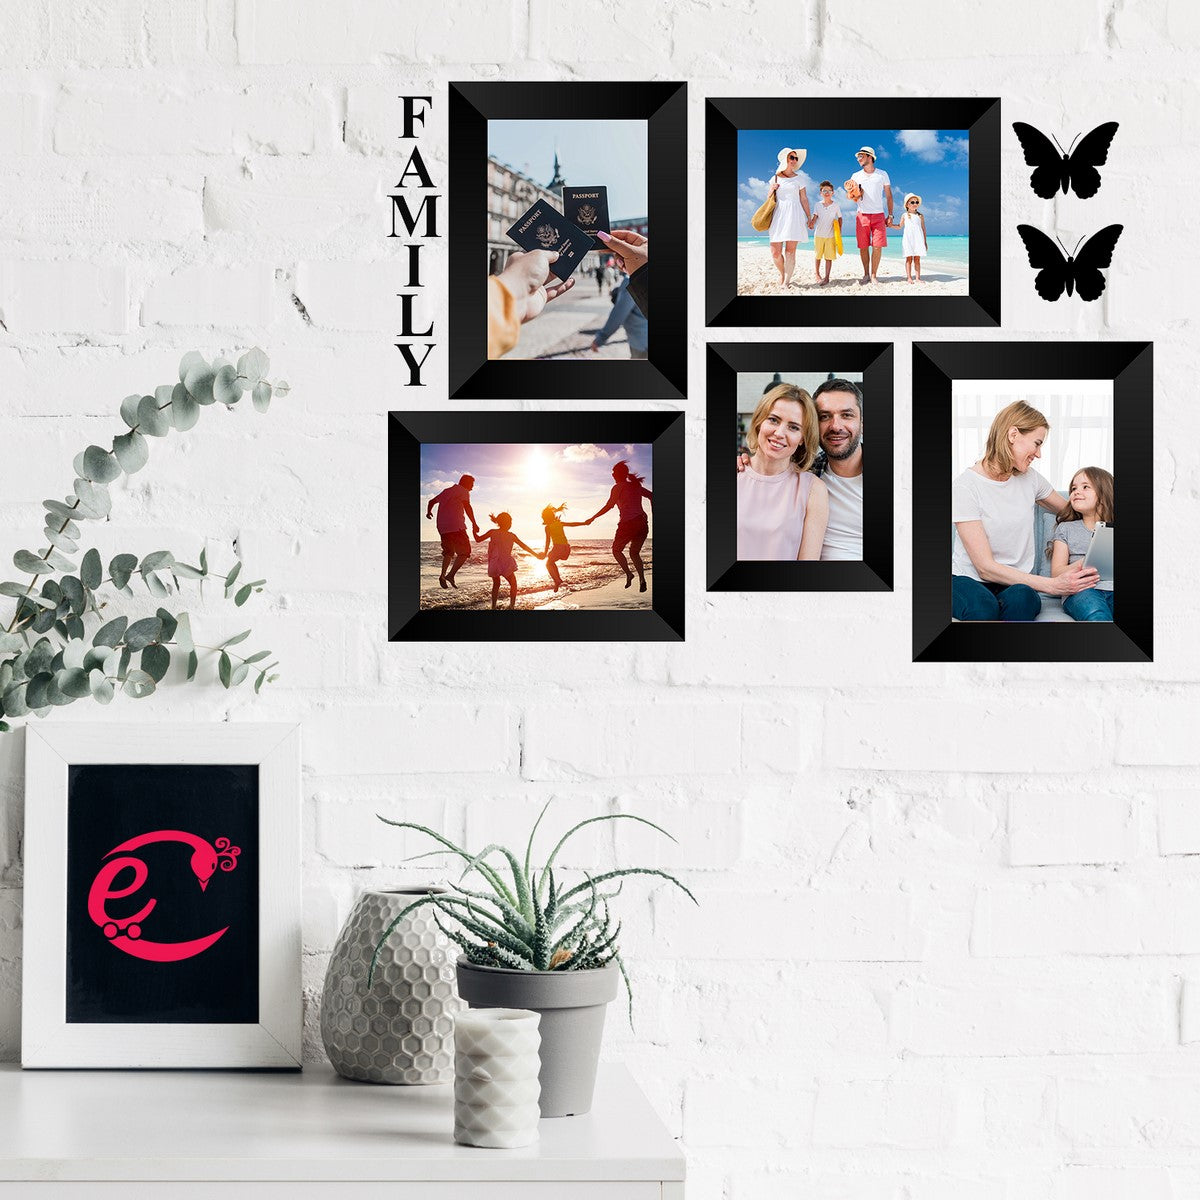 Memory Wall Collage Photo Frame - Set of 5 Photo Frames for 1 Photos of 4"x6", 4 Photos of 5"x7", 1 Piece of FAMILY, 2 Pieces of BUTTERFLIES 1